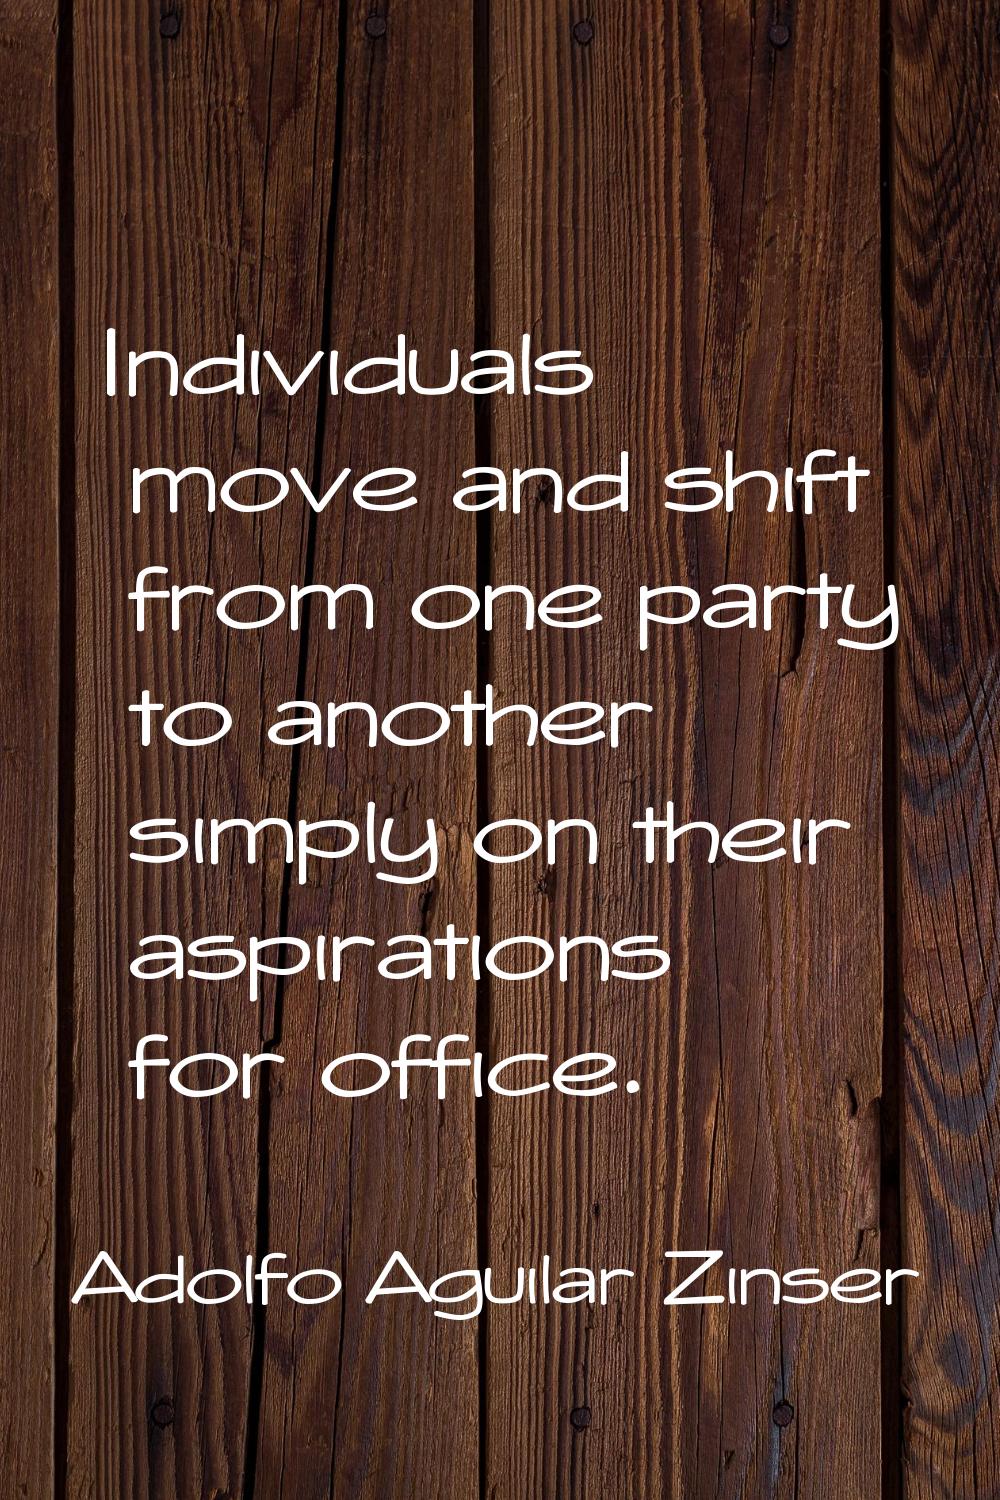 Individuals move and shift from one party to another simply on their aspirations for office.